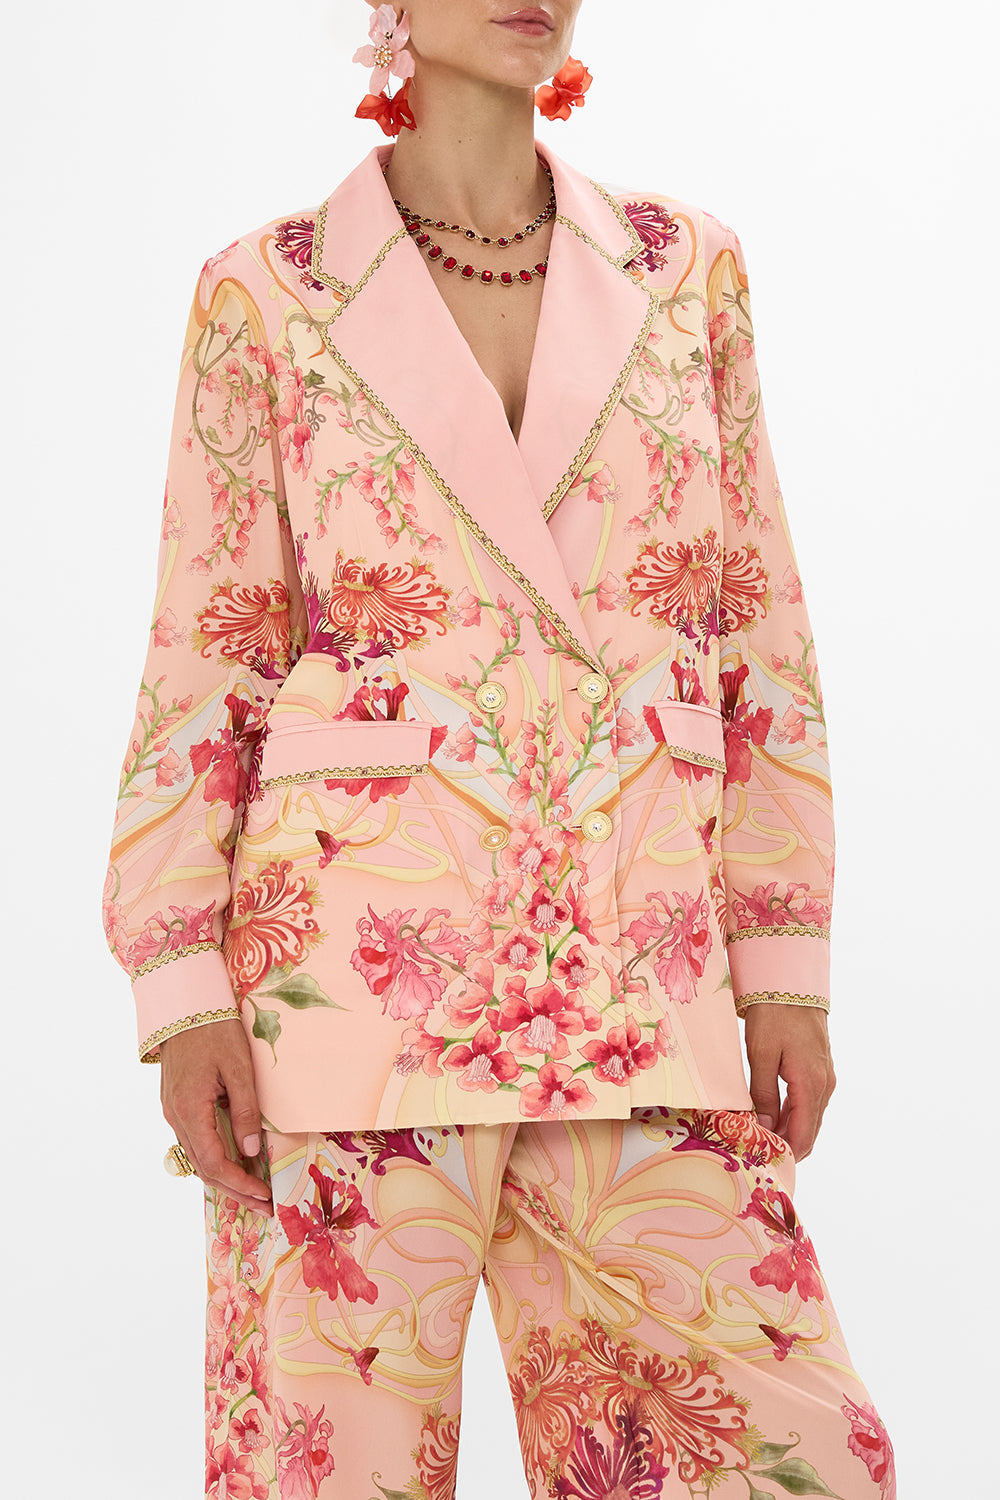 CAMILLA Floral Double Breasted Soft Jacket in Blossoms and Brushstrokes